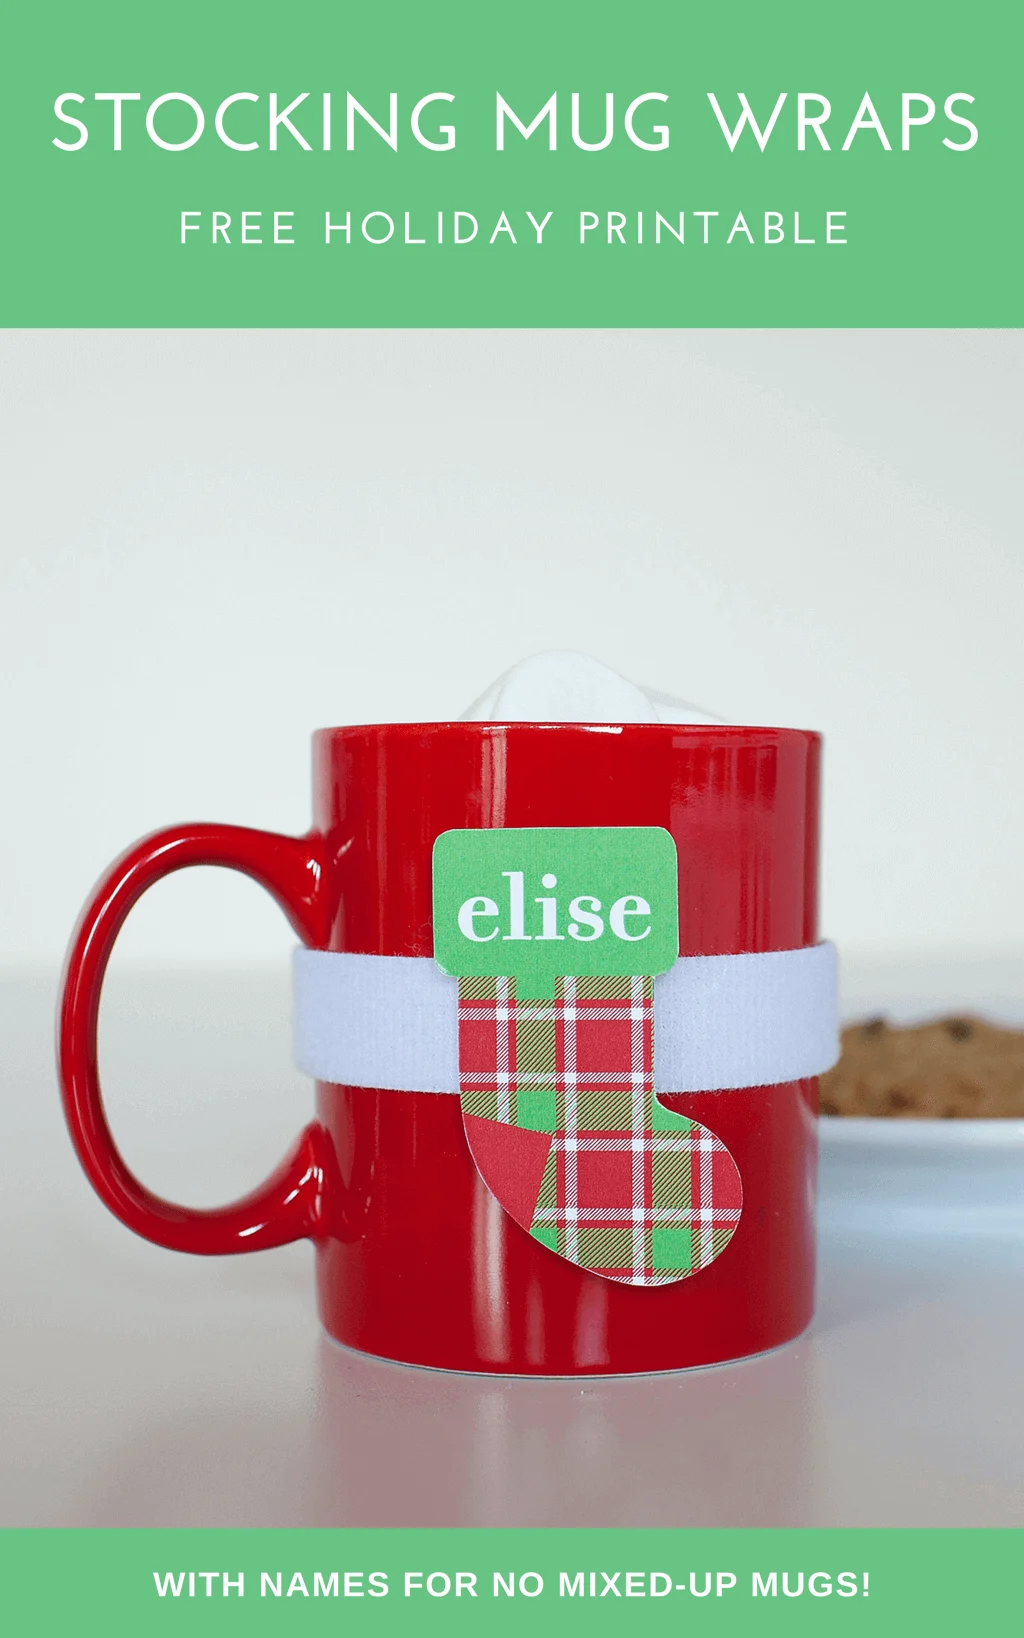 DIY stocking mug wraps free printable. Cute for Christmas Eve cocoa and Christmas breakfasts. Super easy to put onto mugs and remove to wash. Personalize with names for no mixed up mugs! #christmas #diy #crafts #diychristmas #handmadechristmas #christmasbreakfast #spon